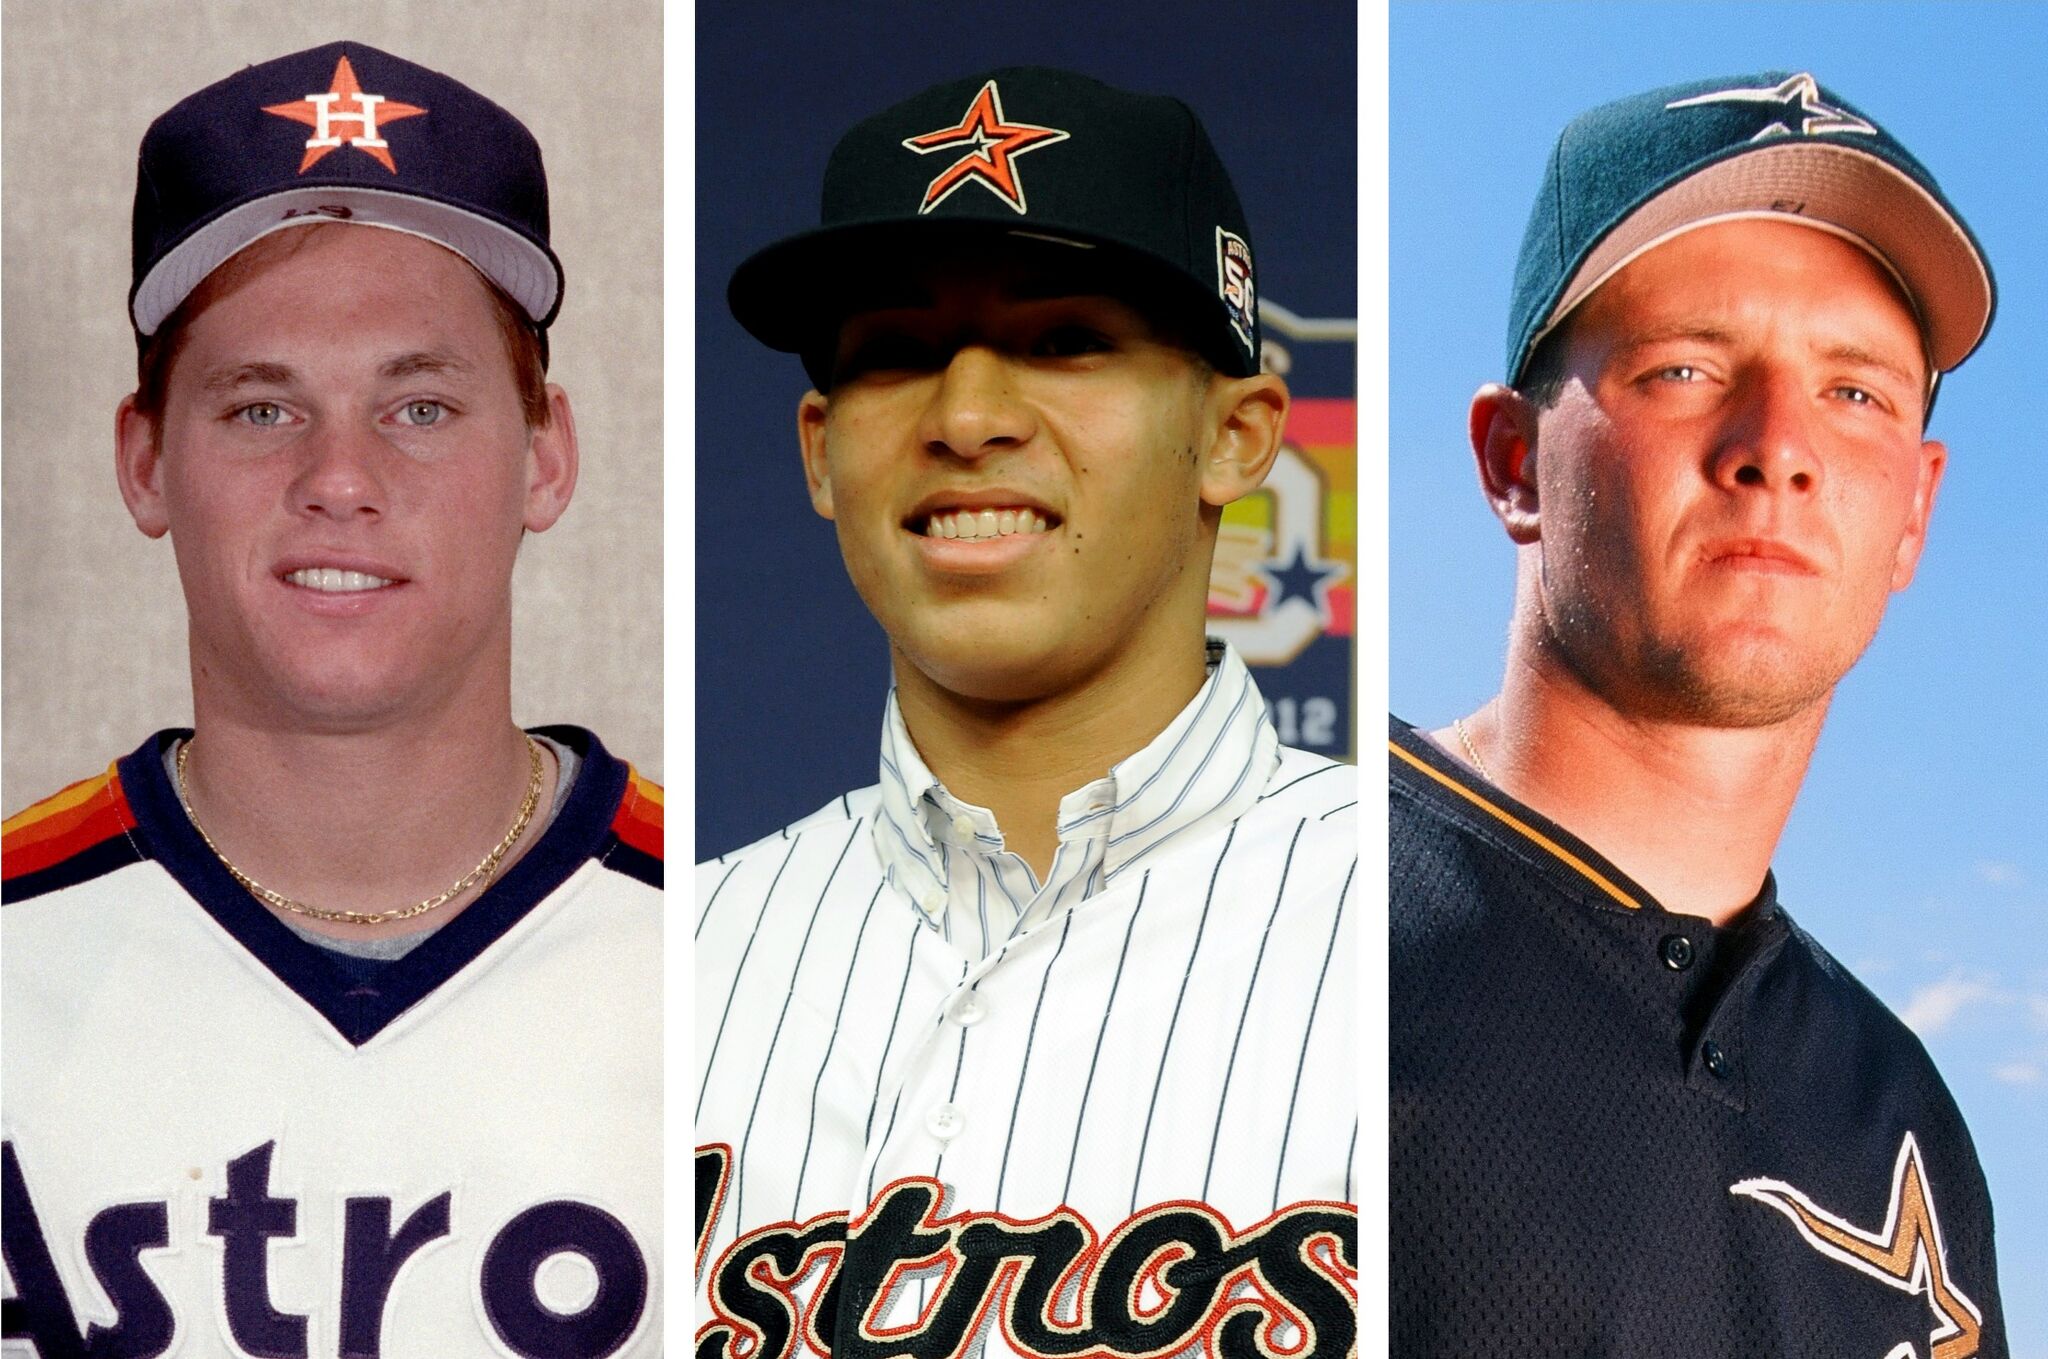 Houston Astros 2012 Draft: Where Are They Now? - The Crawfish Boxes